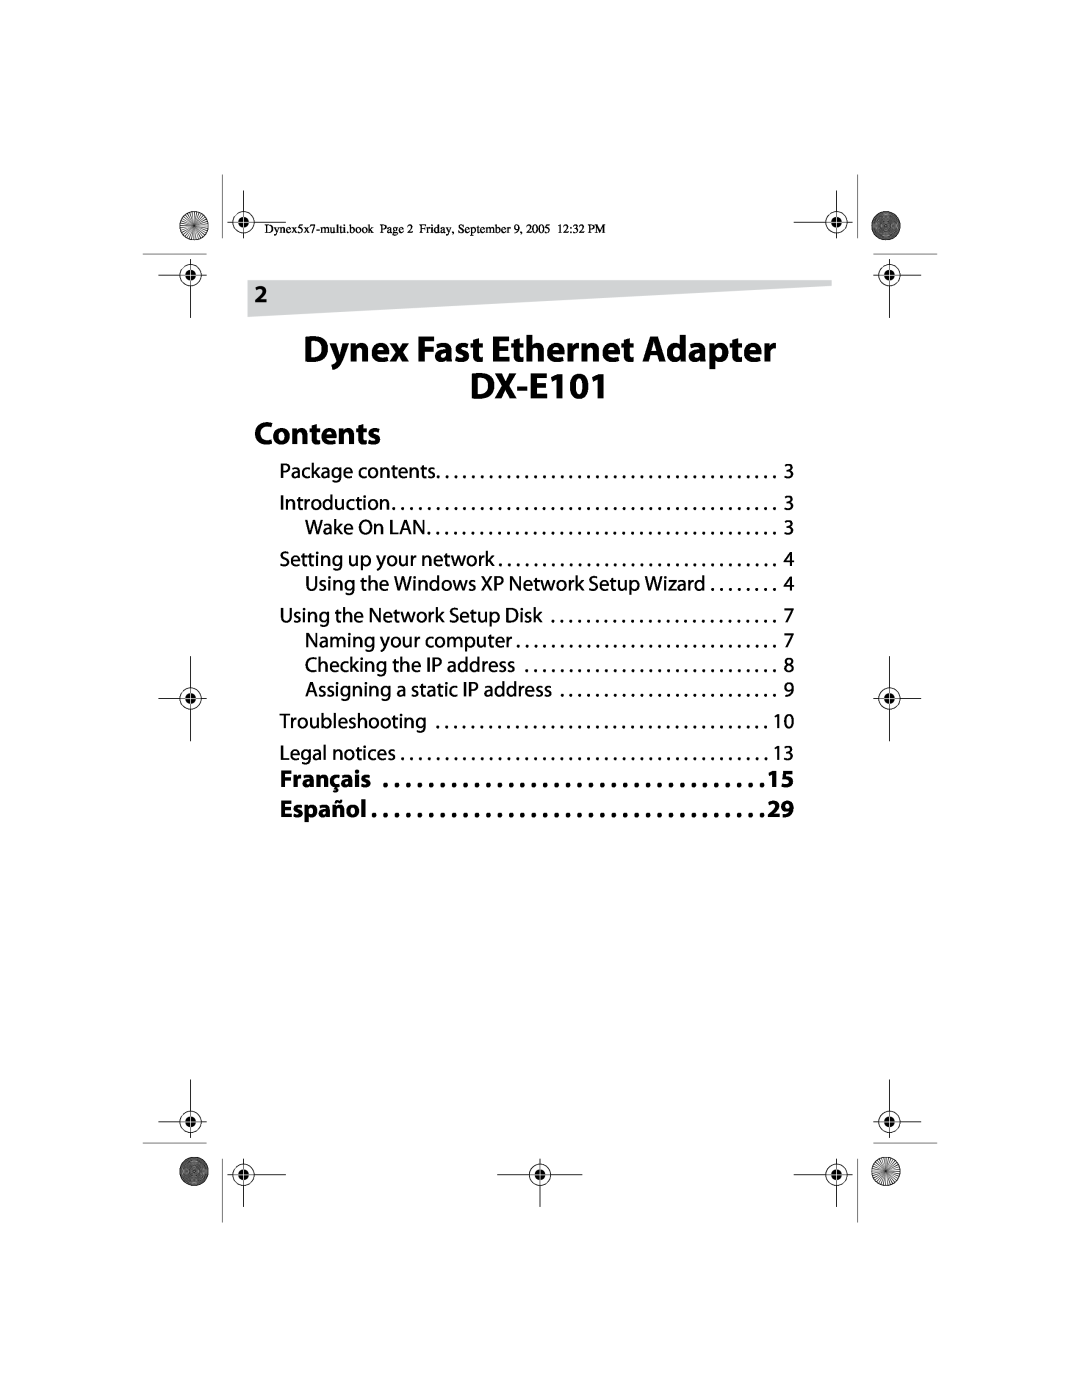 Dynex manual Dynex Fast Ethernet Adapter DX-E101, Contents, Package contents, Troubleshooting Legal notices 